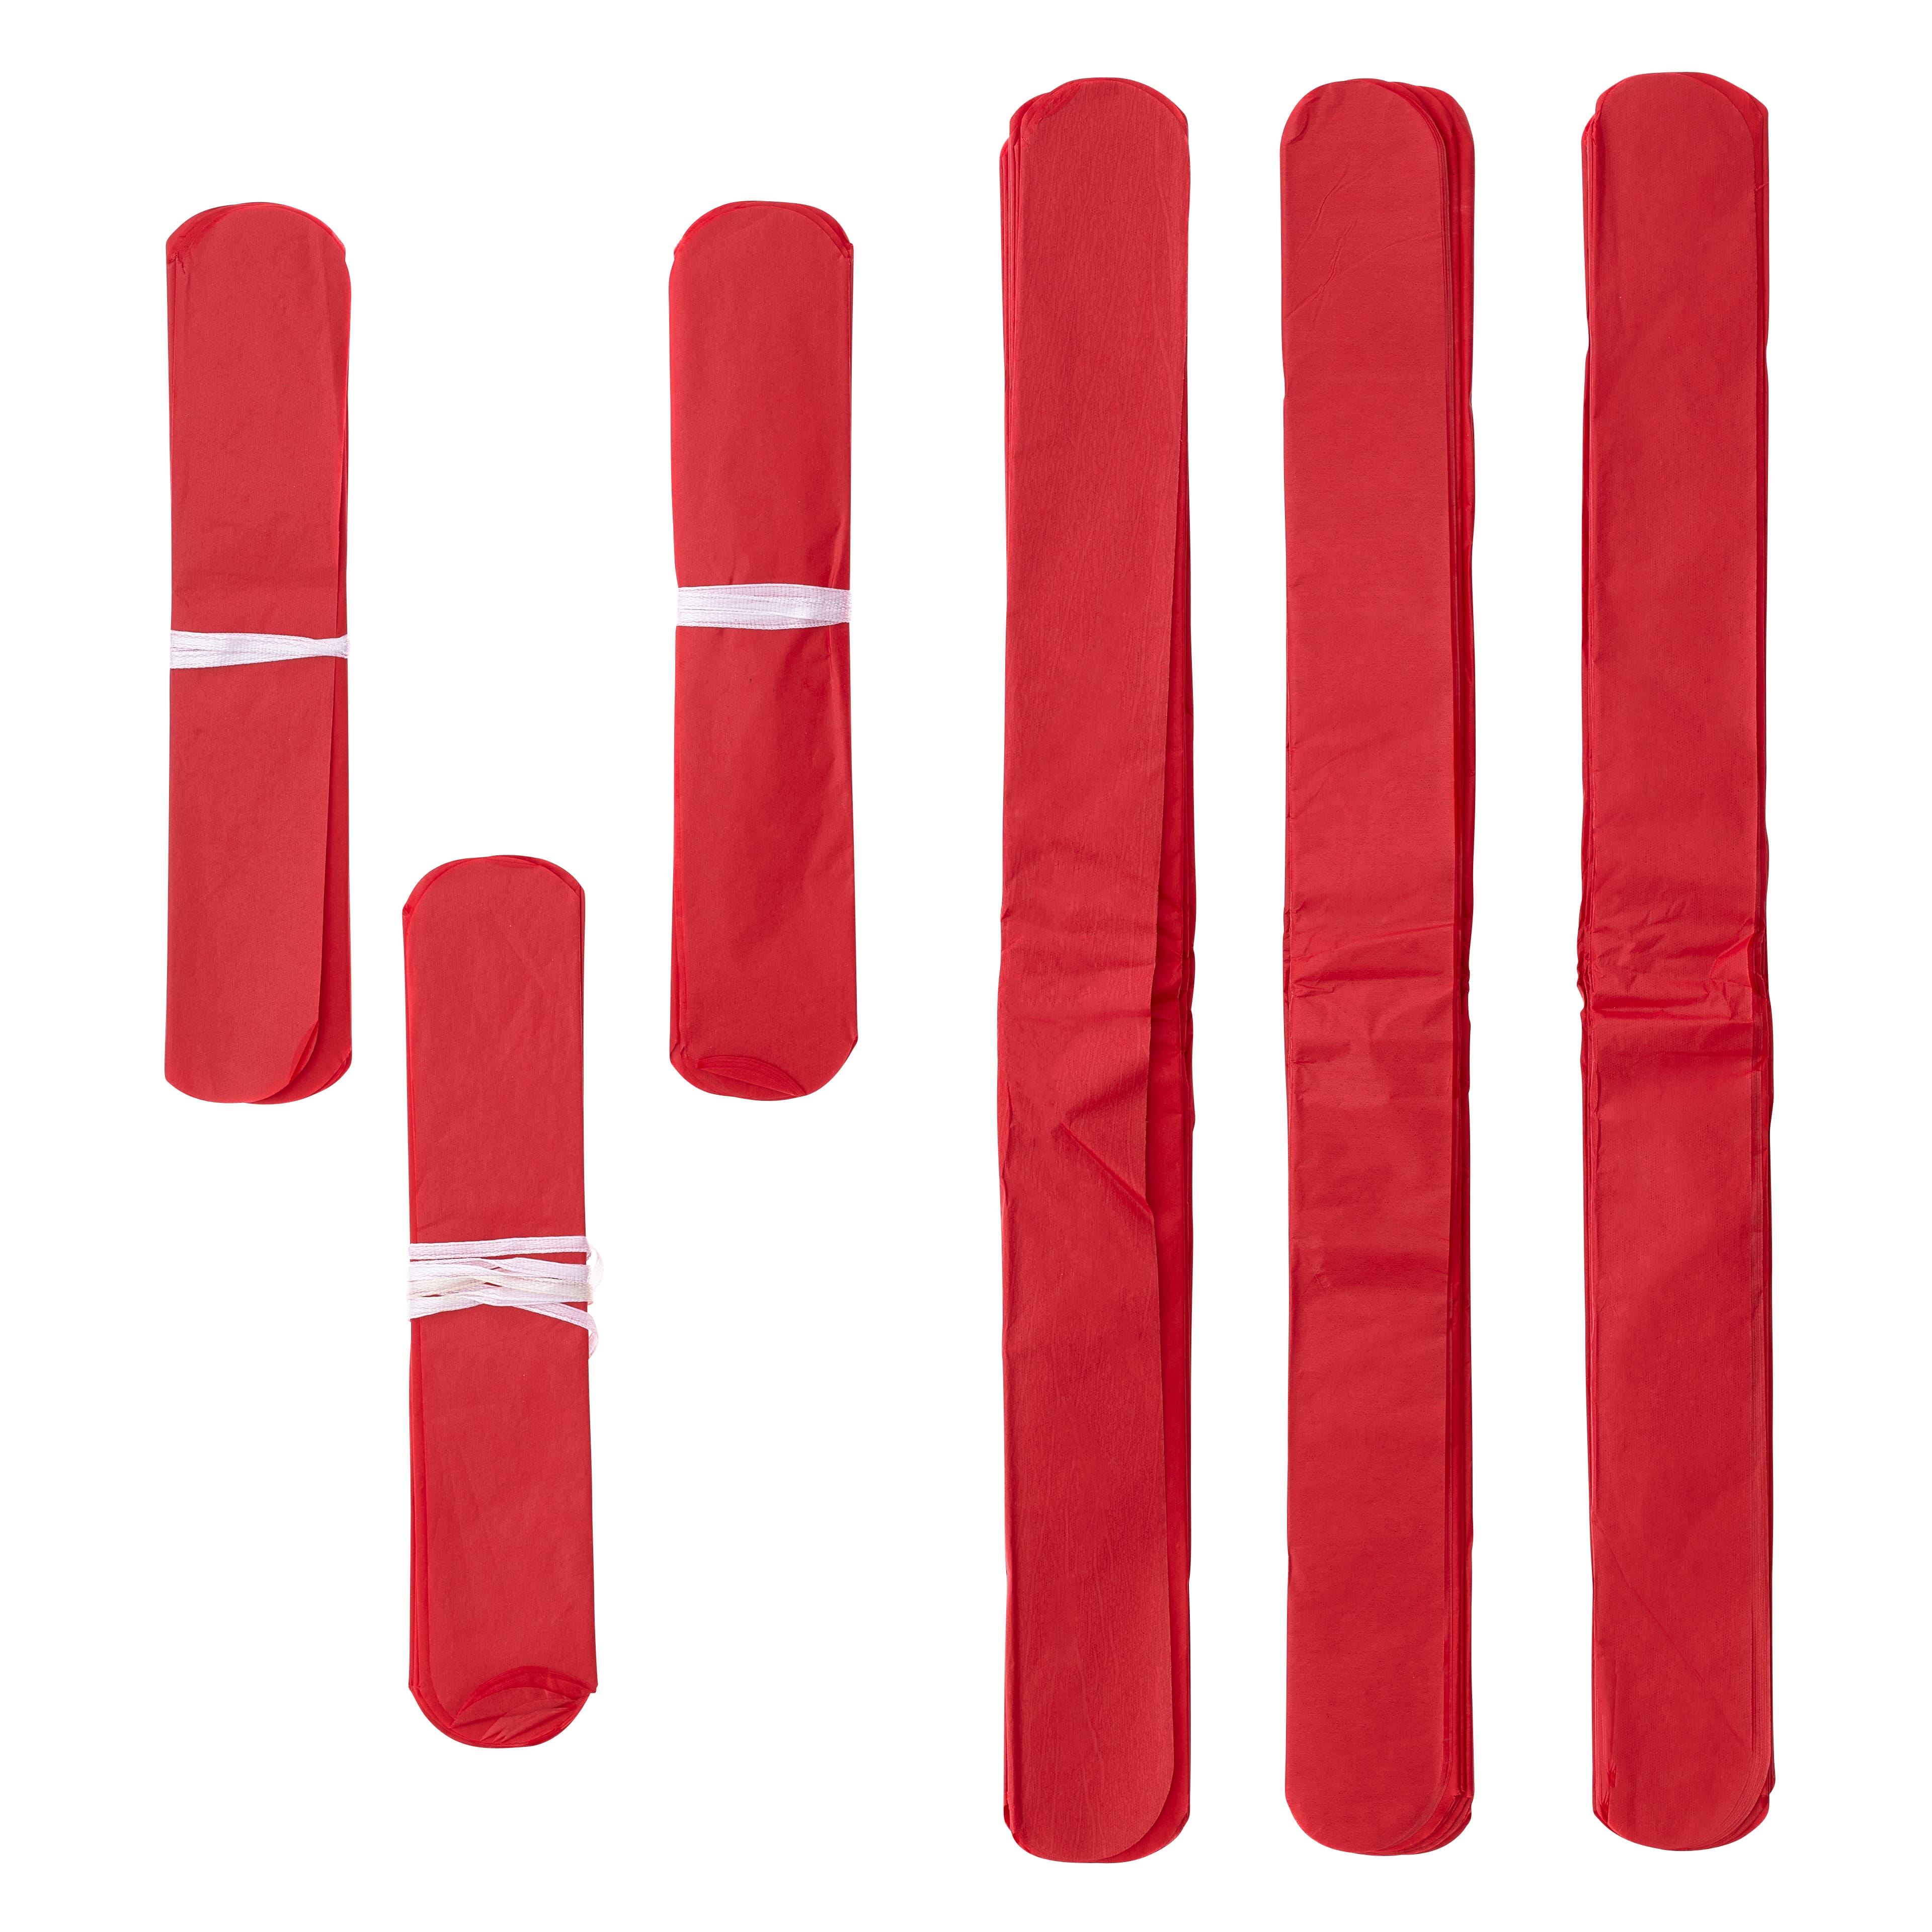 Single Pom poms - Red: 25mm – The Home Crafters Ltd.